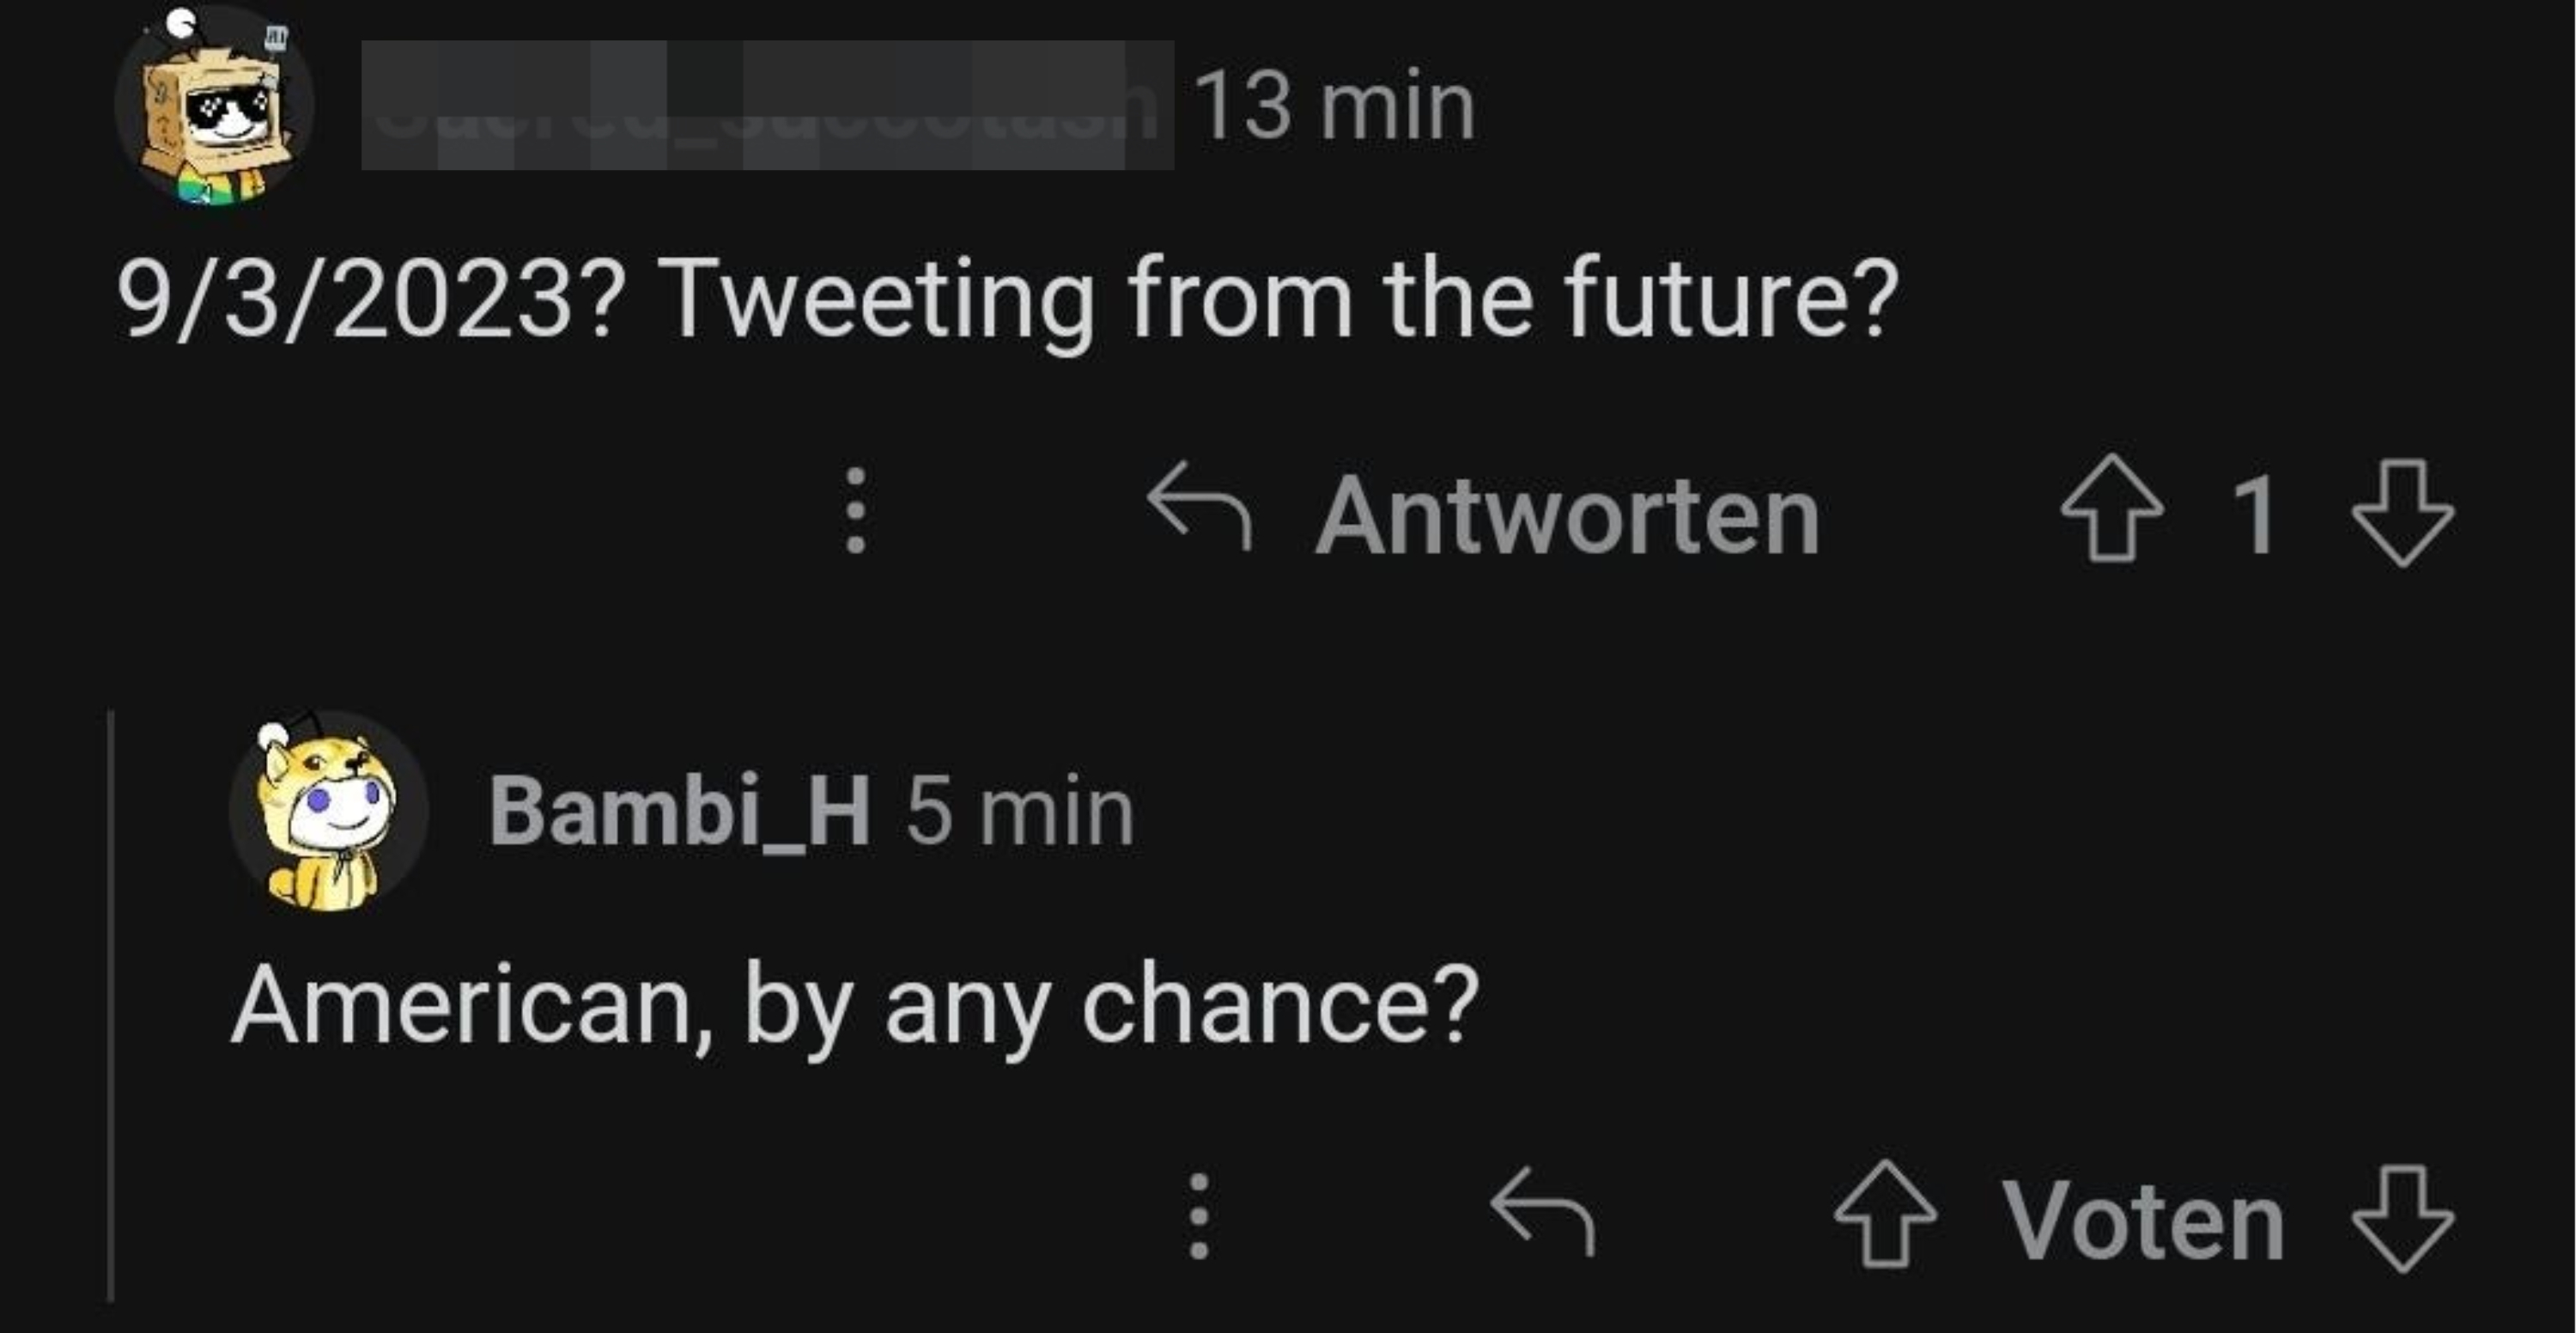 &quot;Tweeting from the future?&quot;